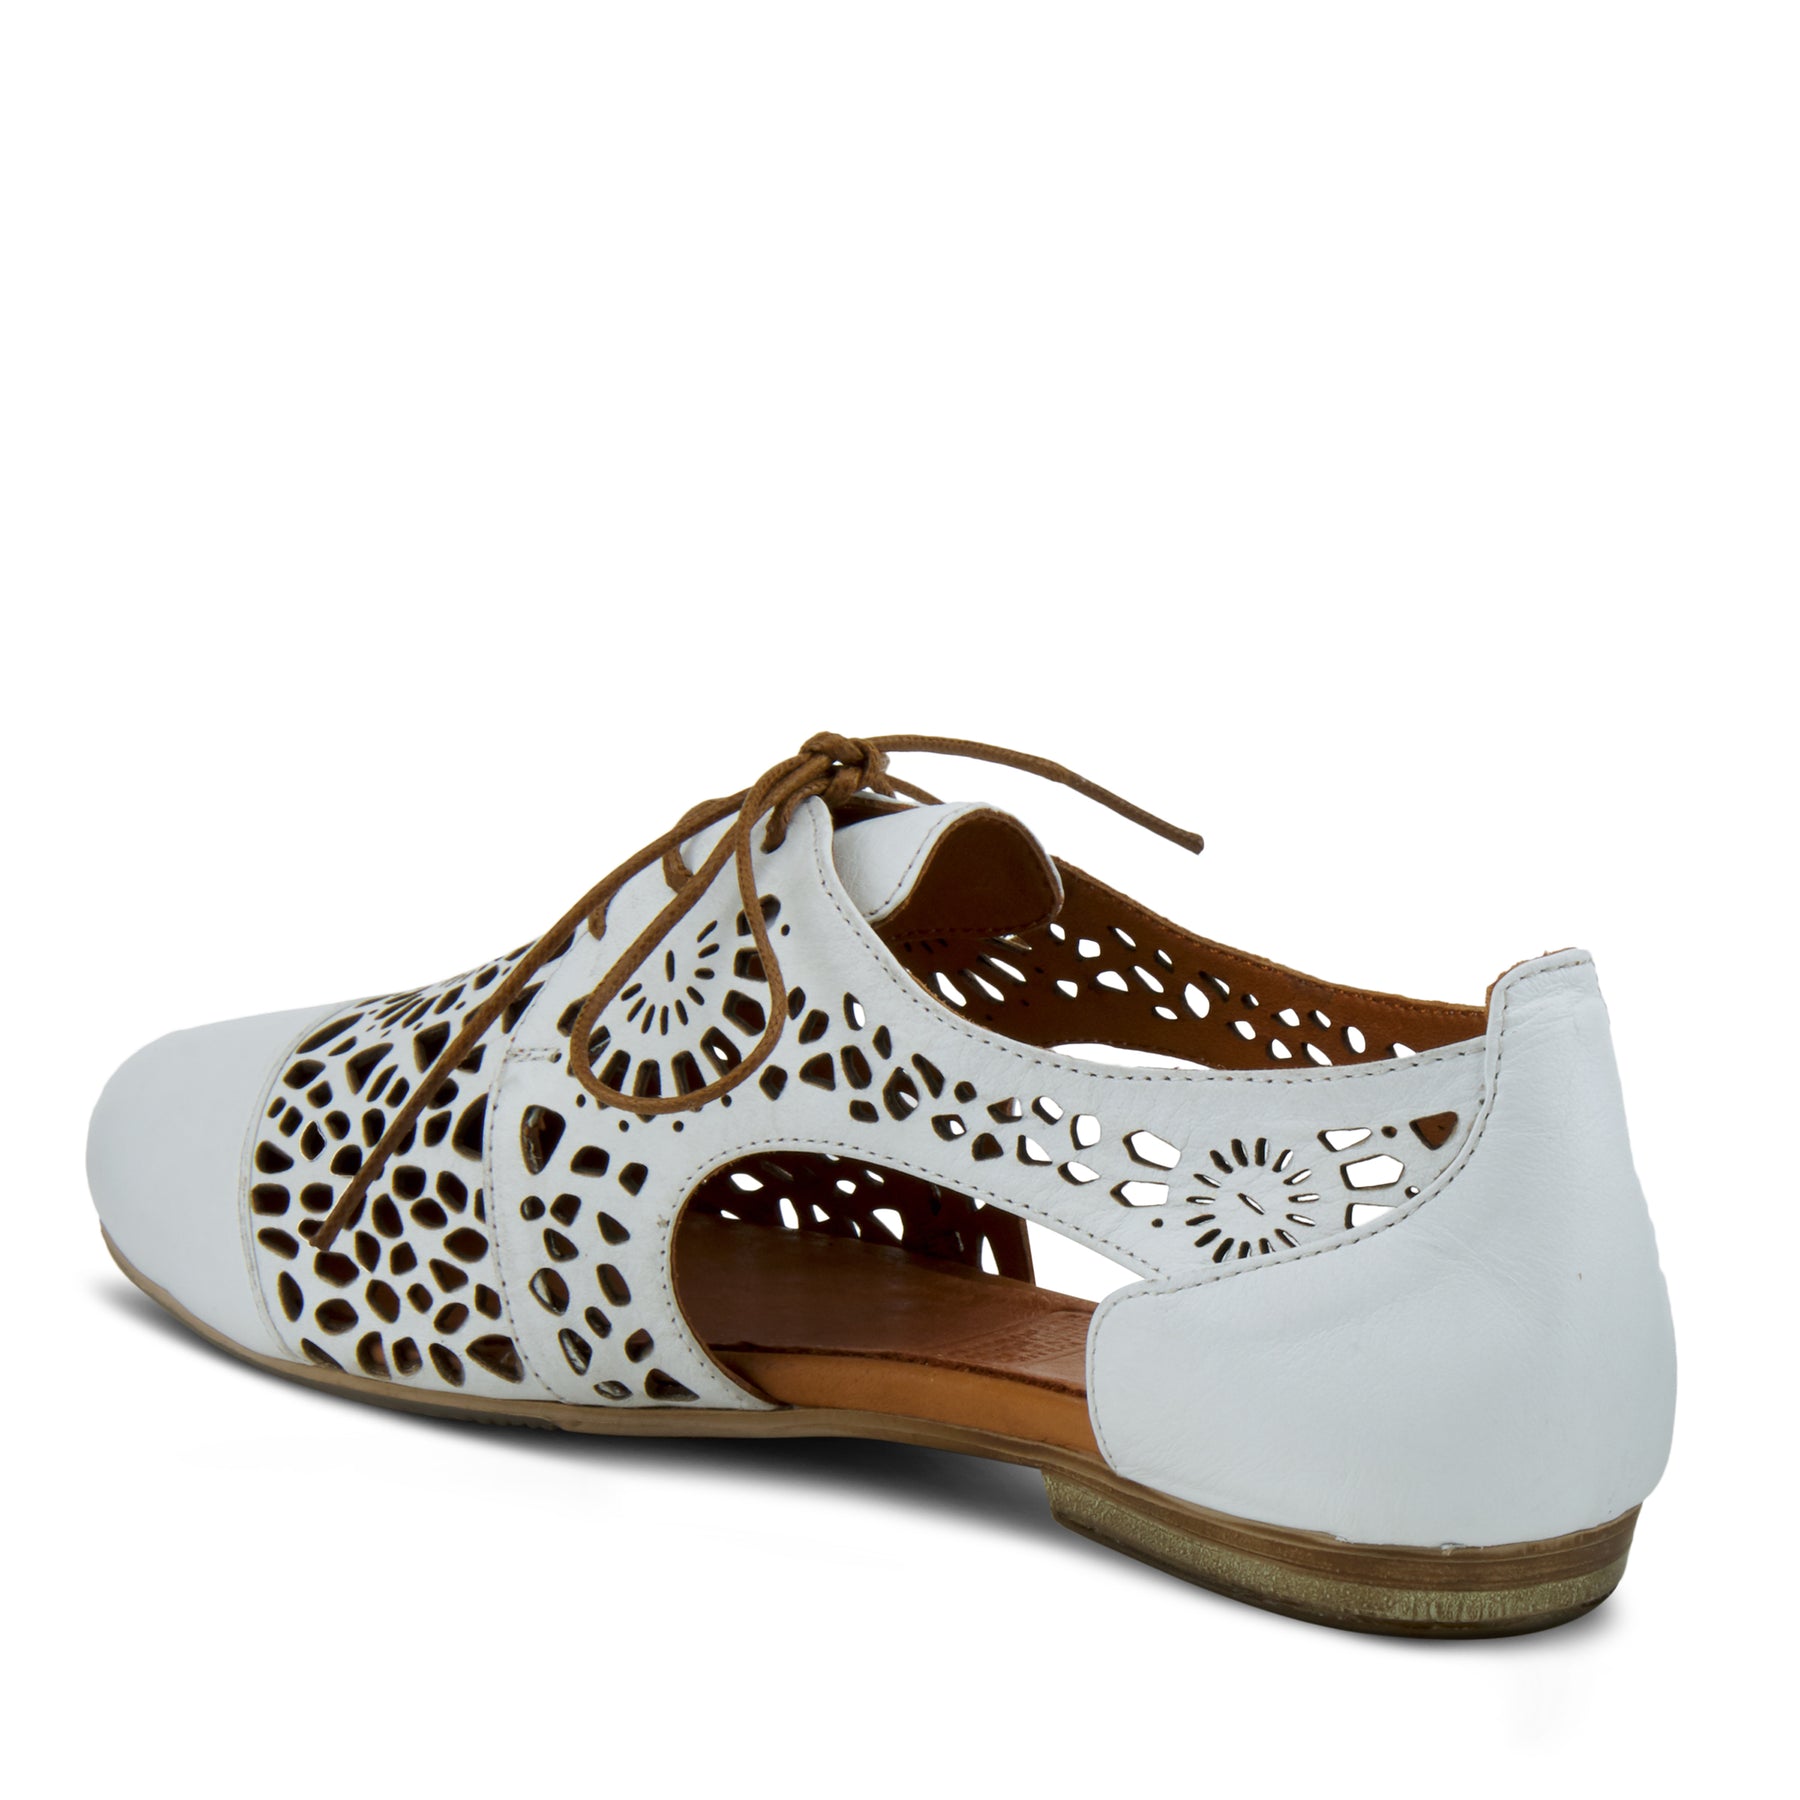 THEONE SHOE by SPRING STEP – Spring Step Shoes